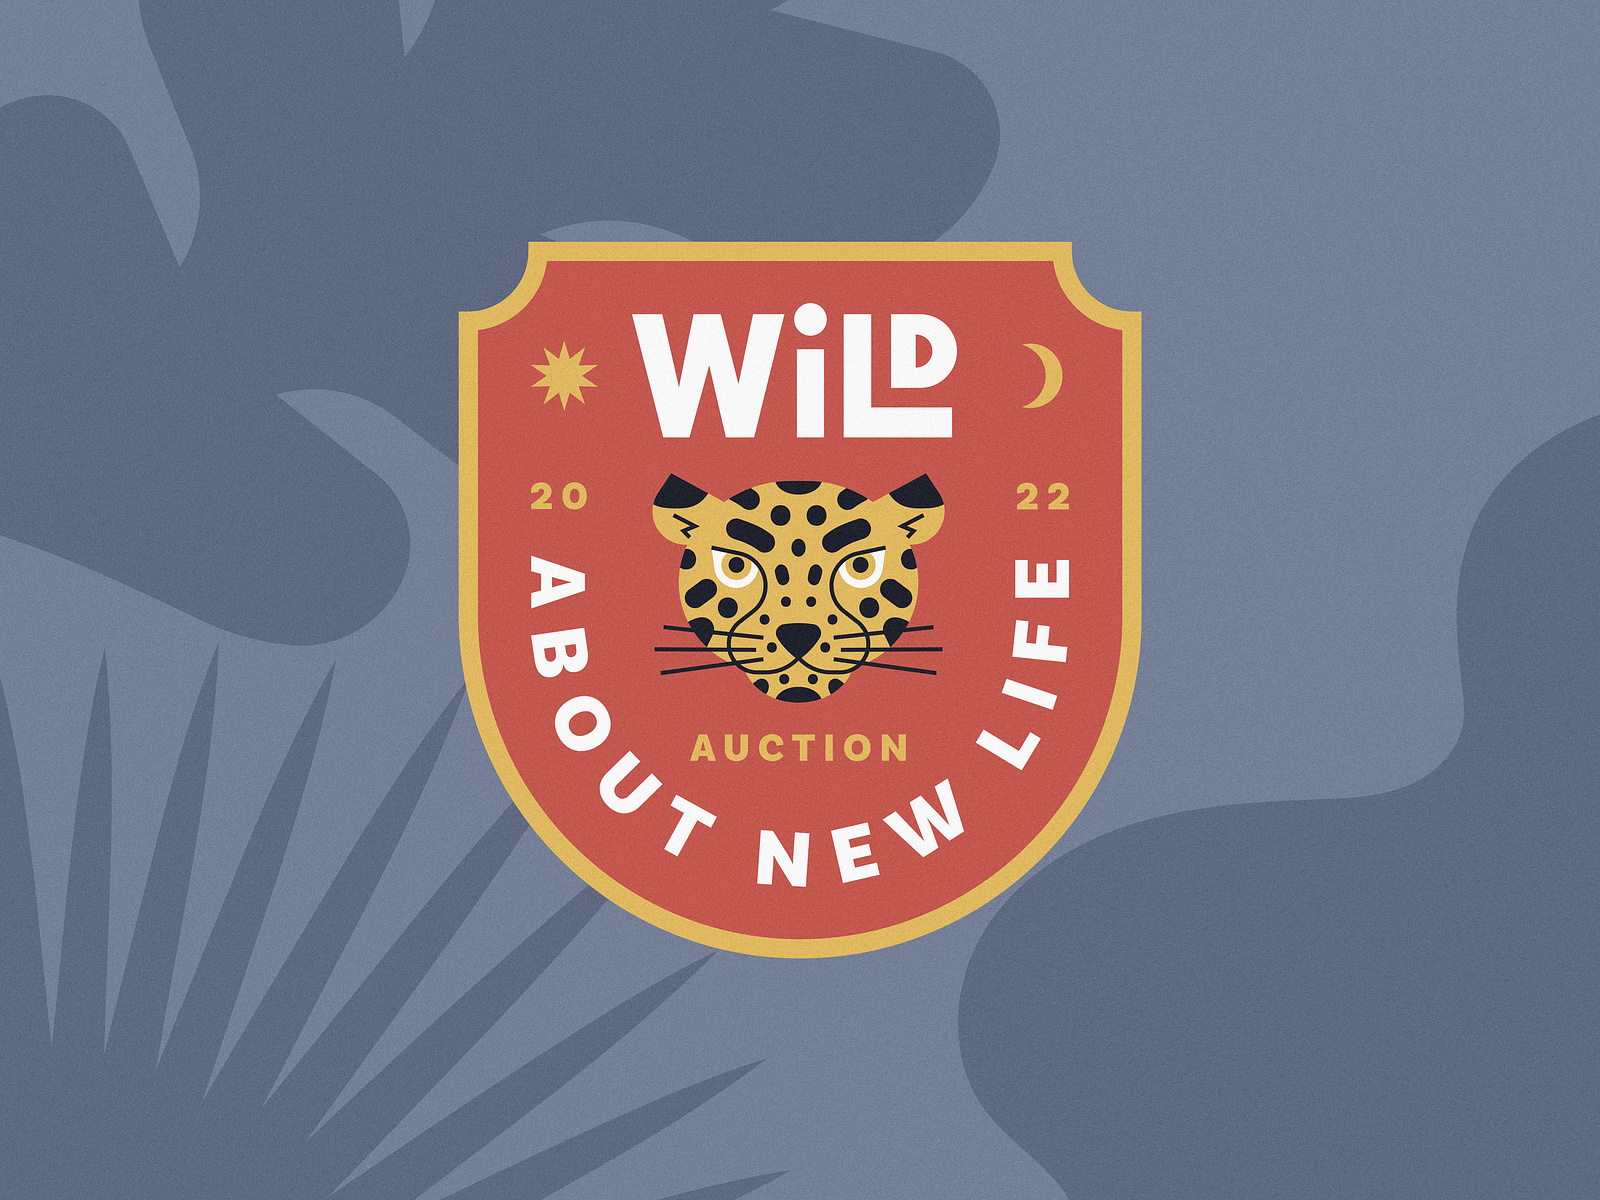 New Life Academy Auction 2022 Badge by Malley Design on Dribbble